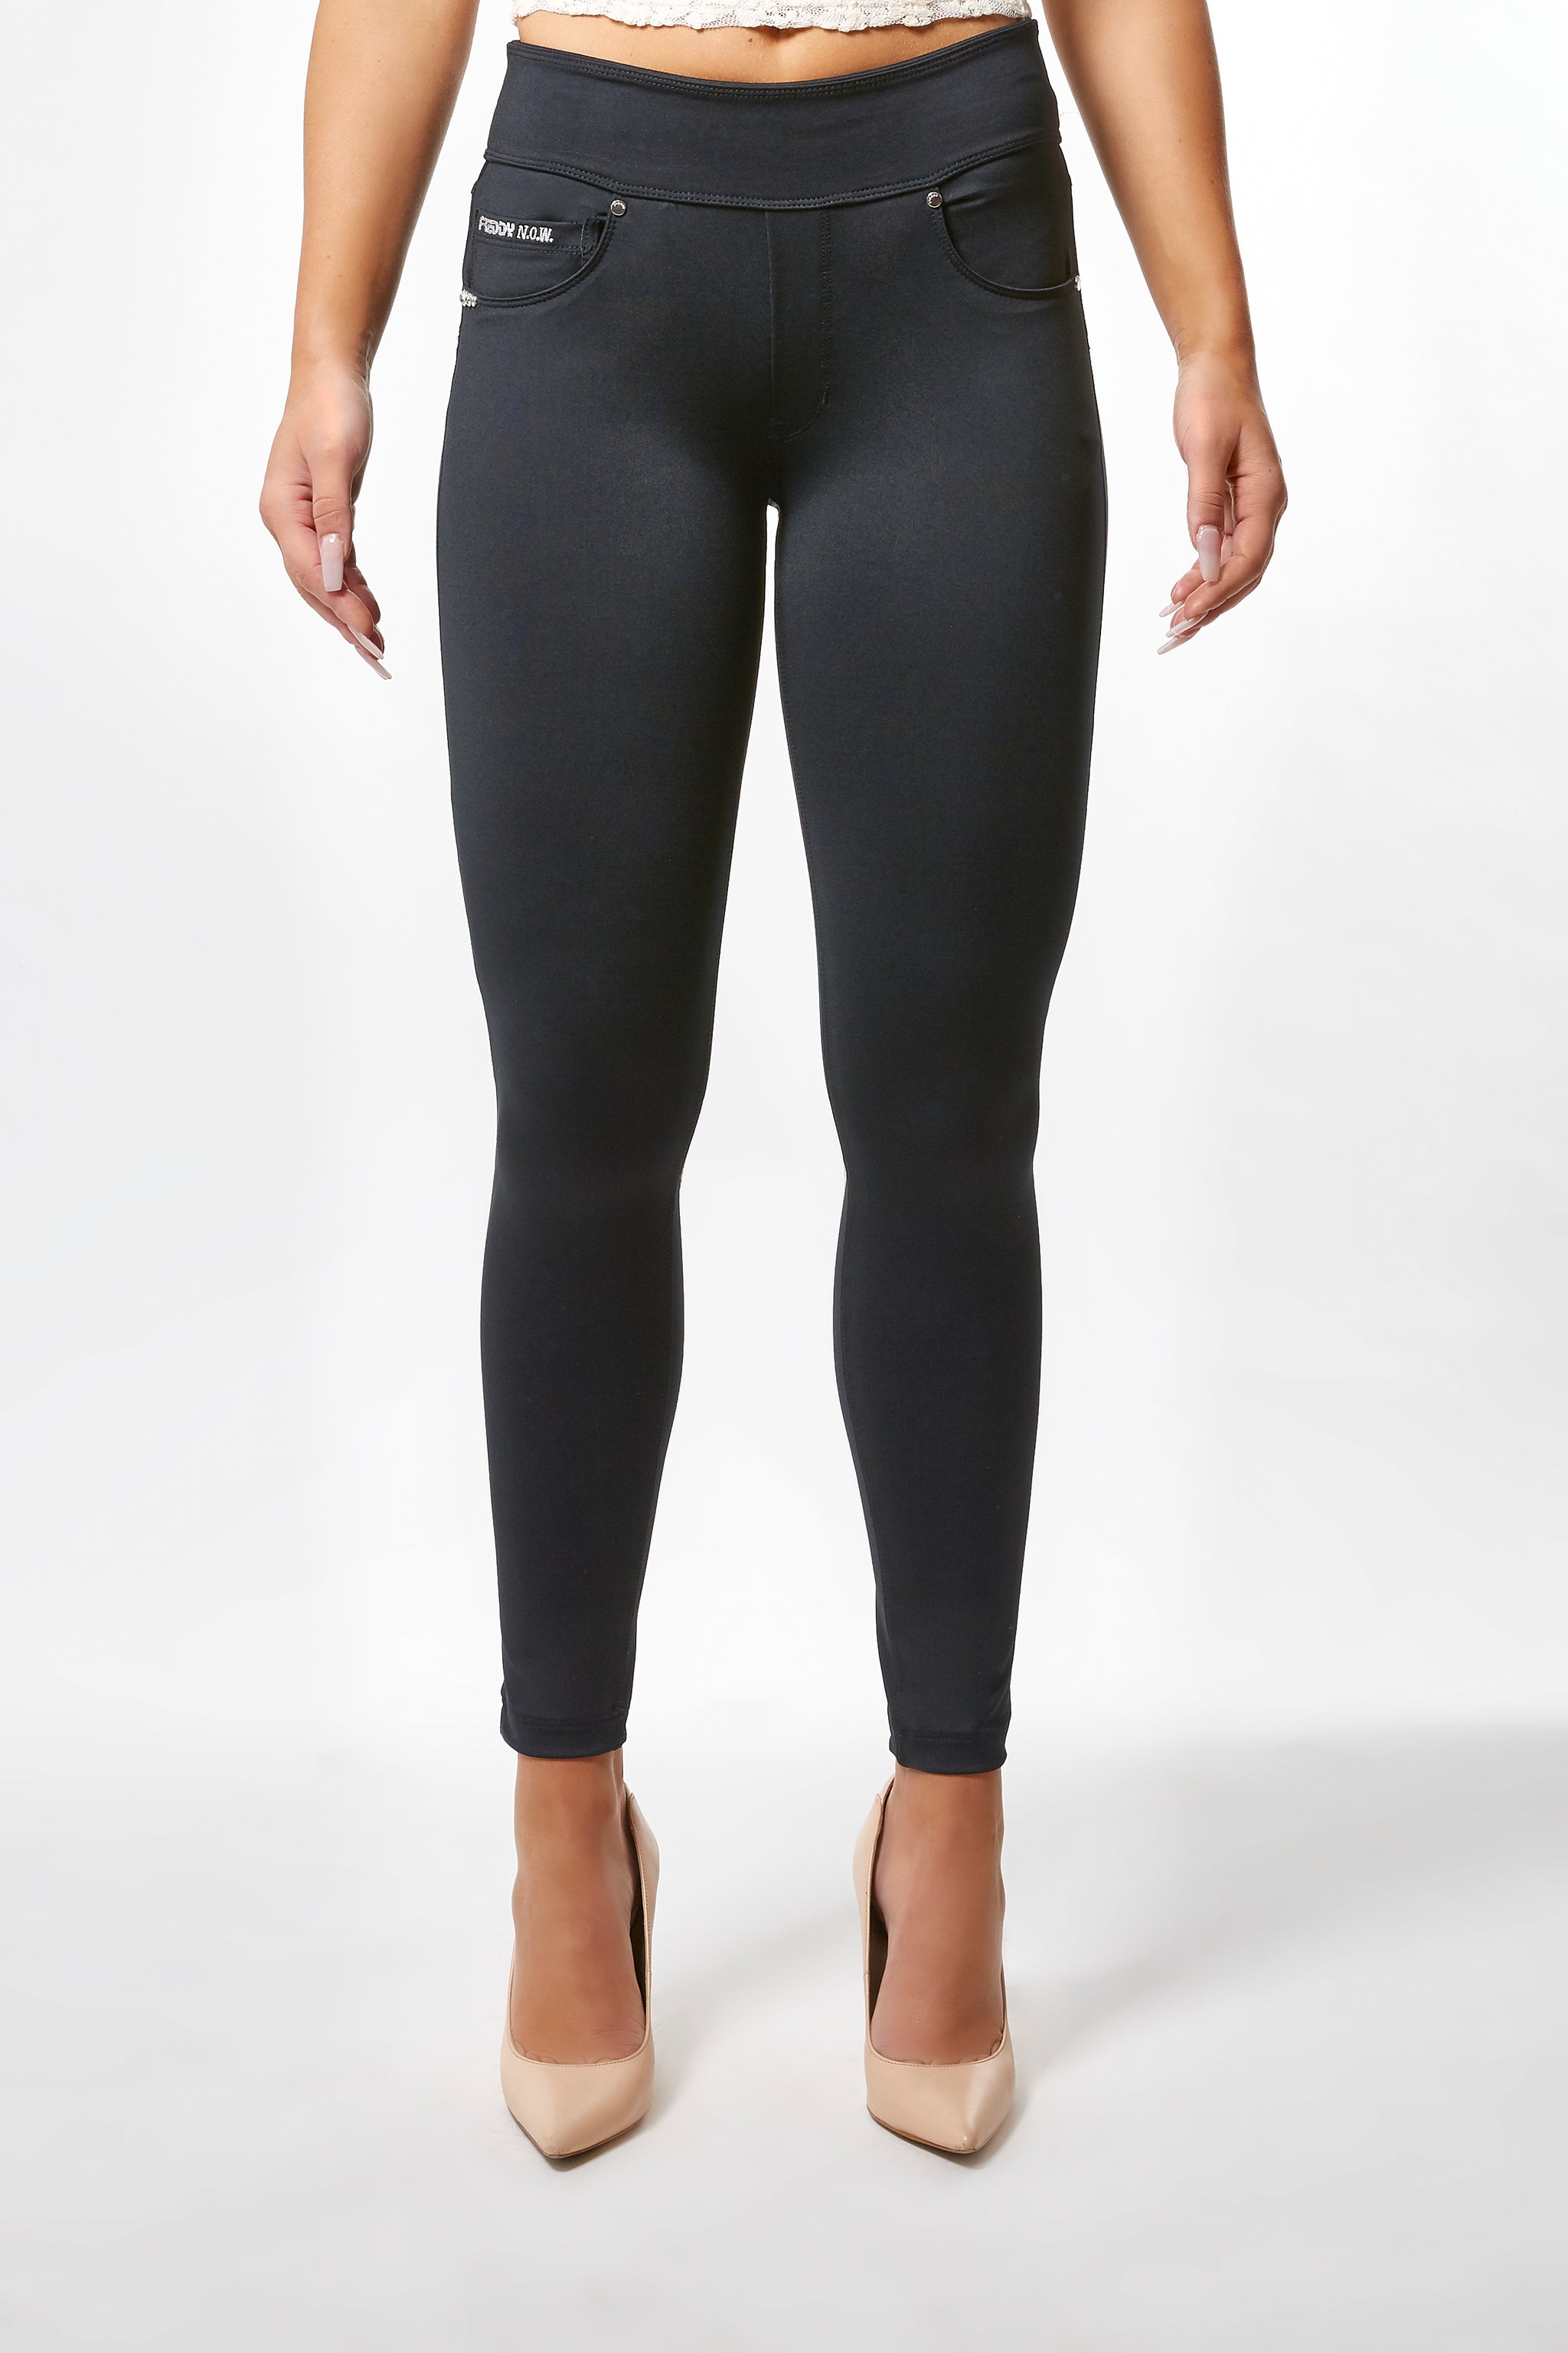 Polyester High Waist Women Yoga Pants, Solid, Slim Fit at Rs 274